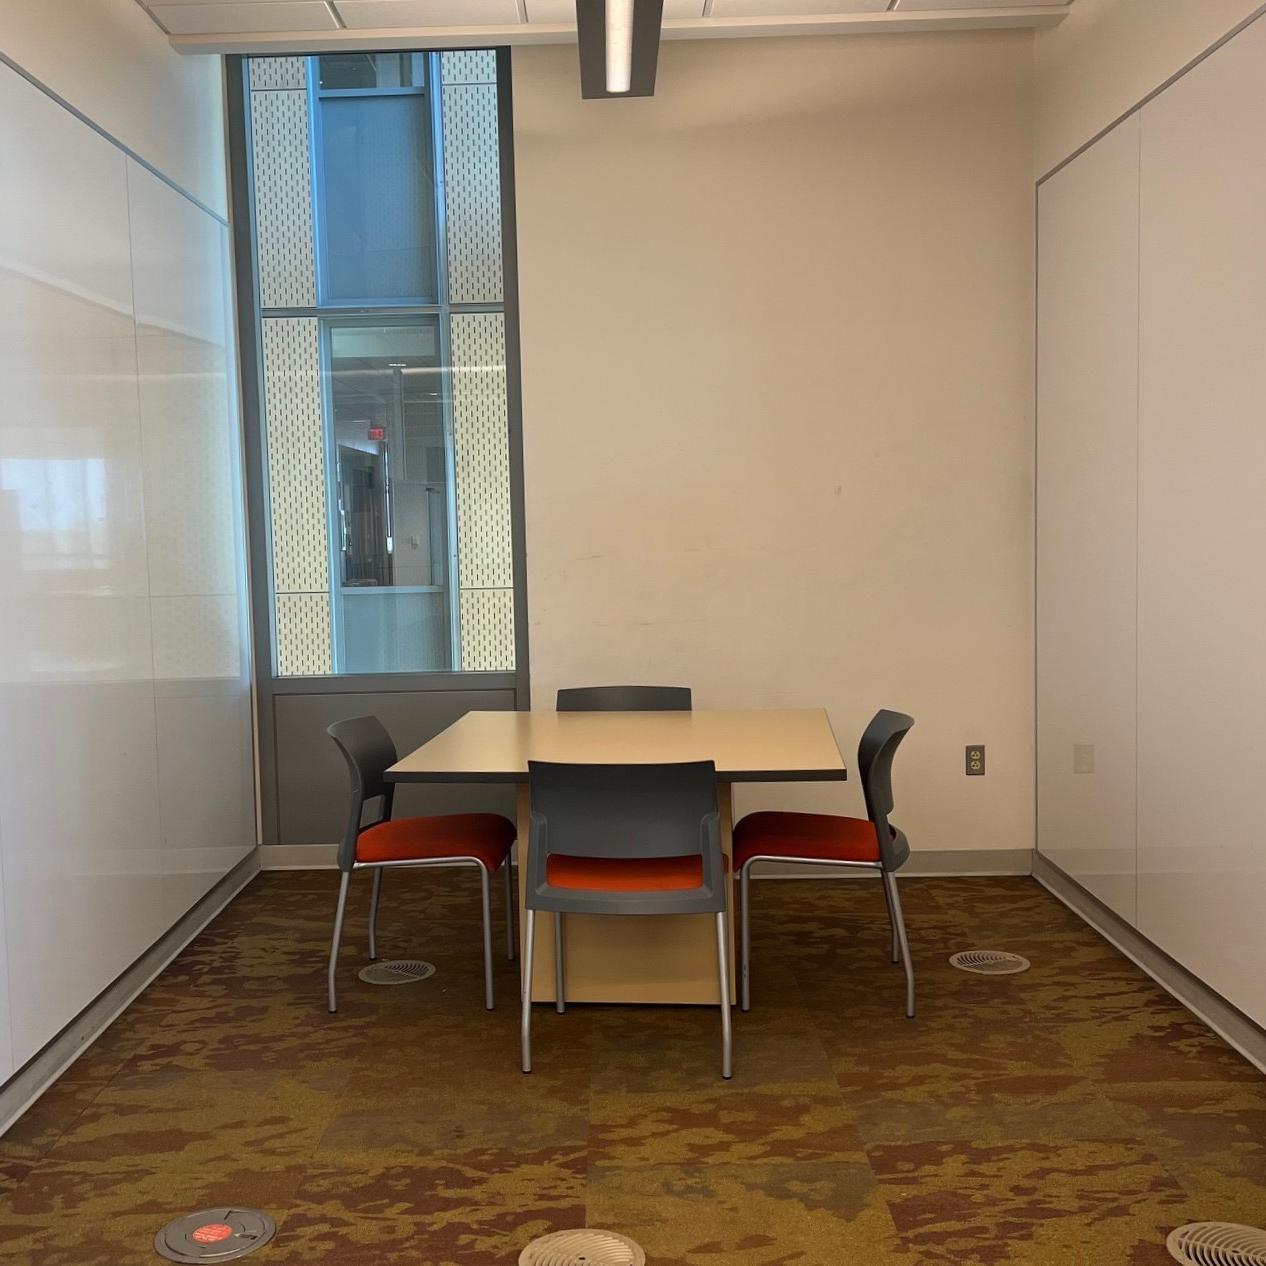 Photo of the innovation zone study alcove